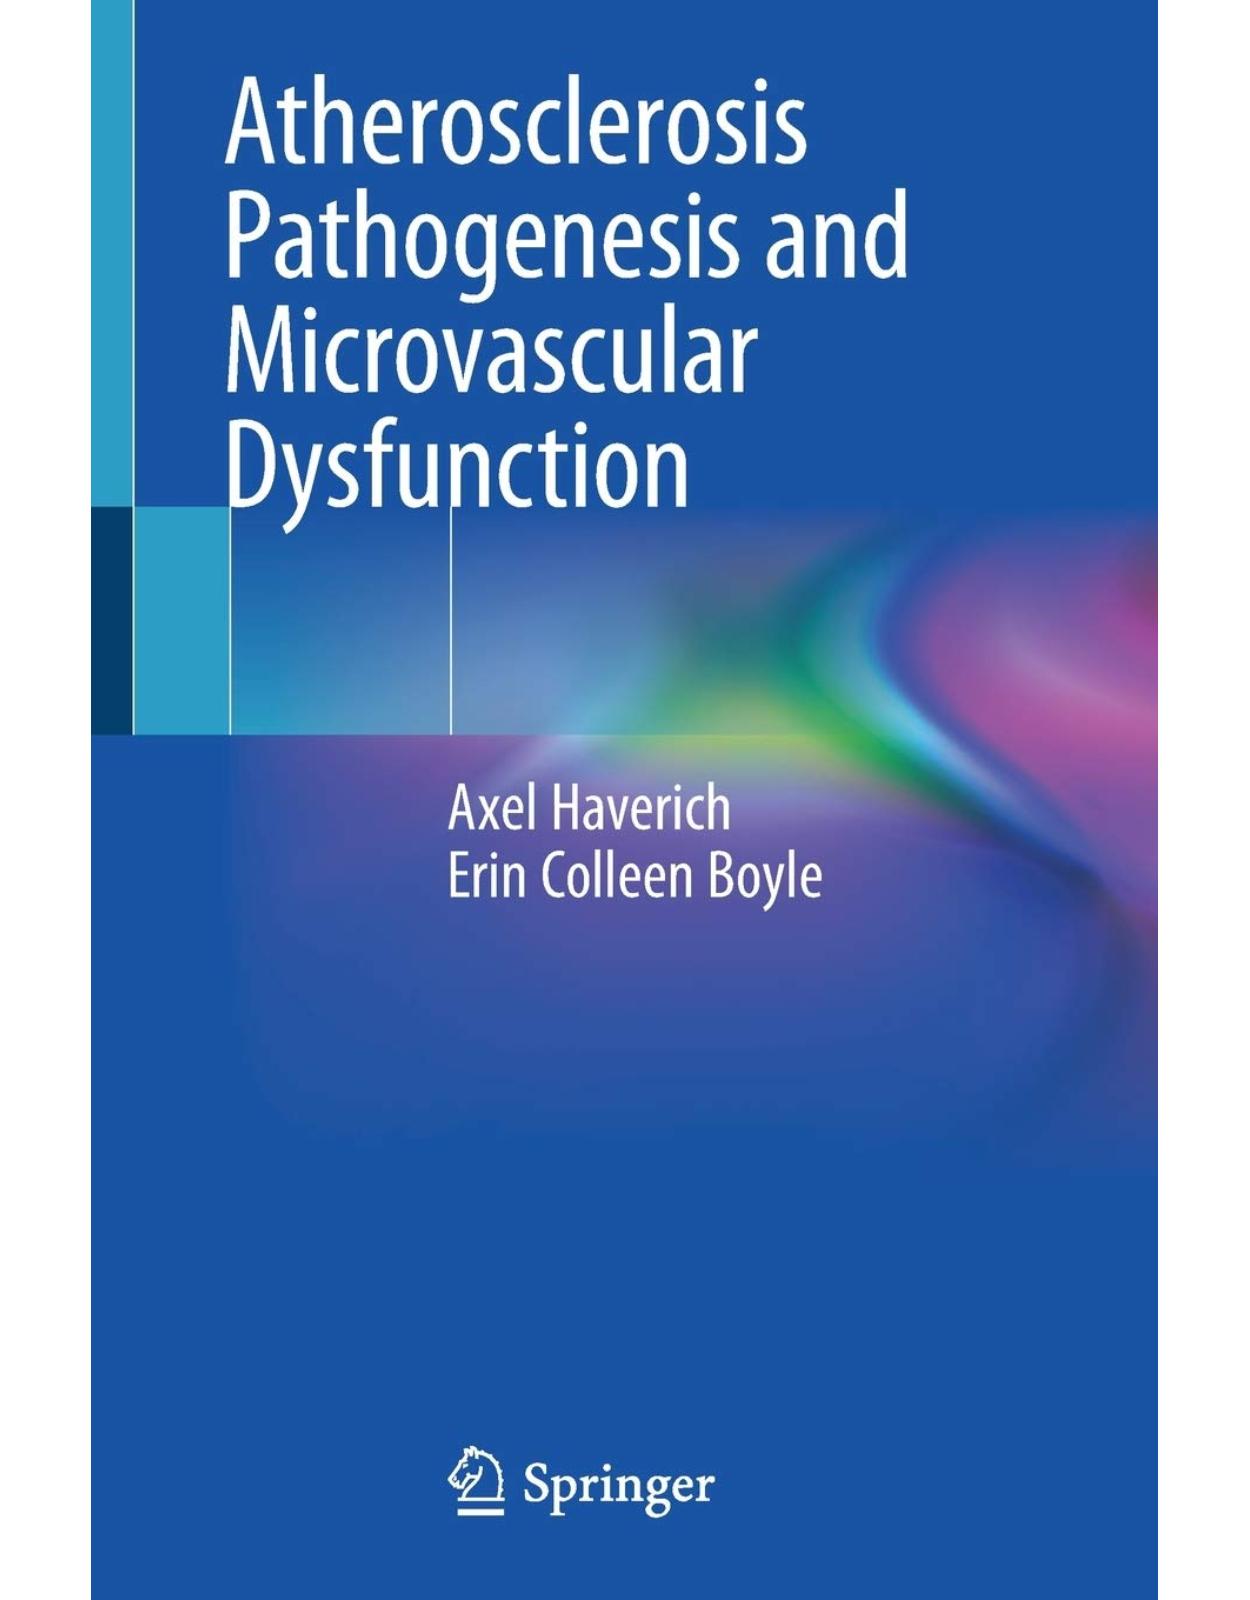 Atherosclerosis Pathogenesis and Microvascular Dysfunction